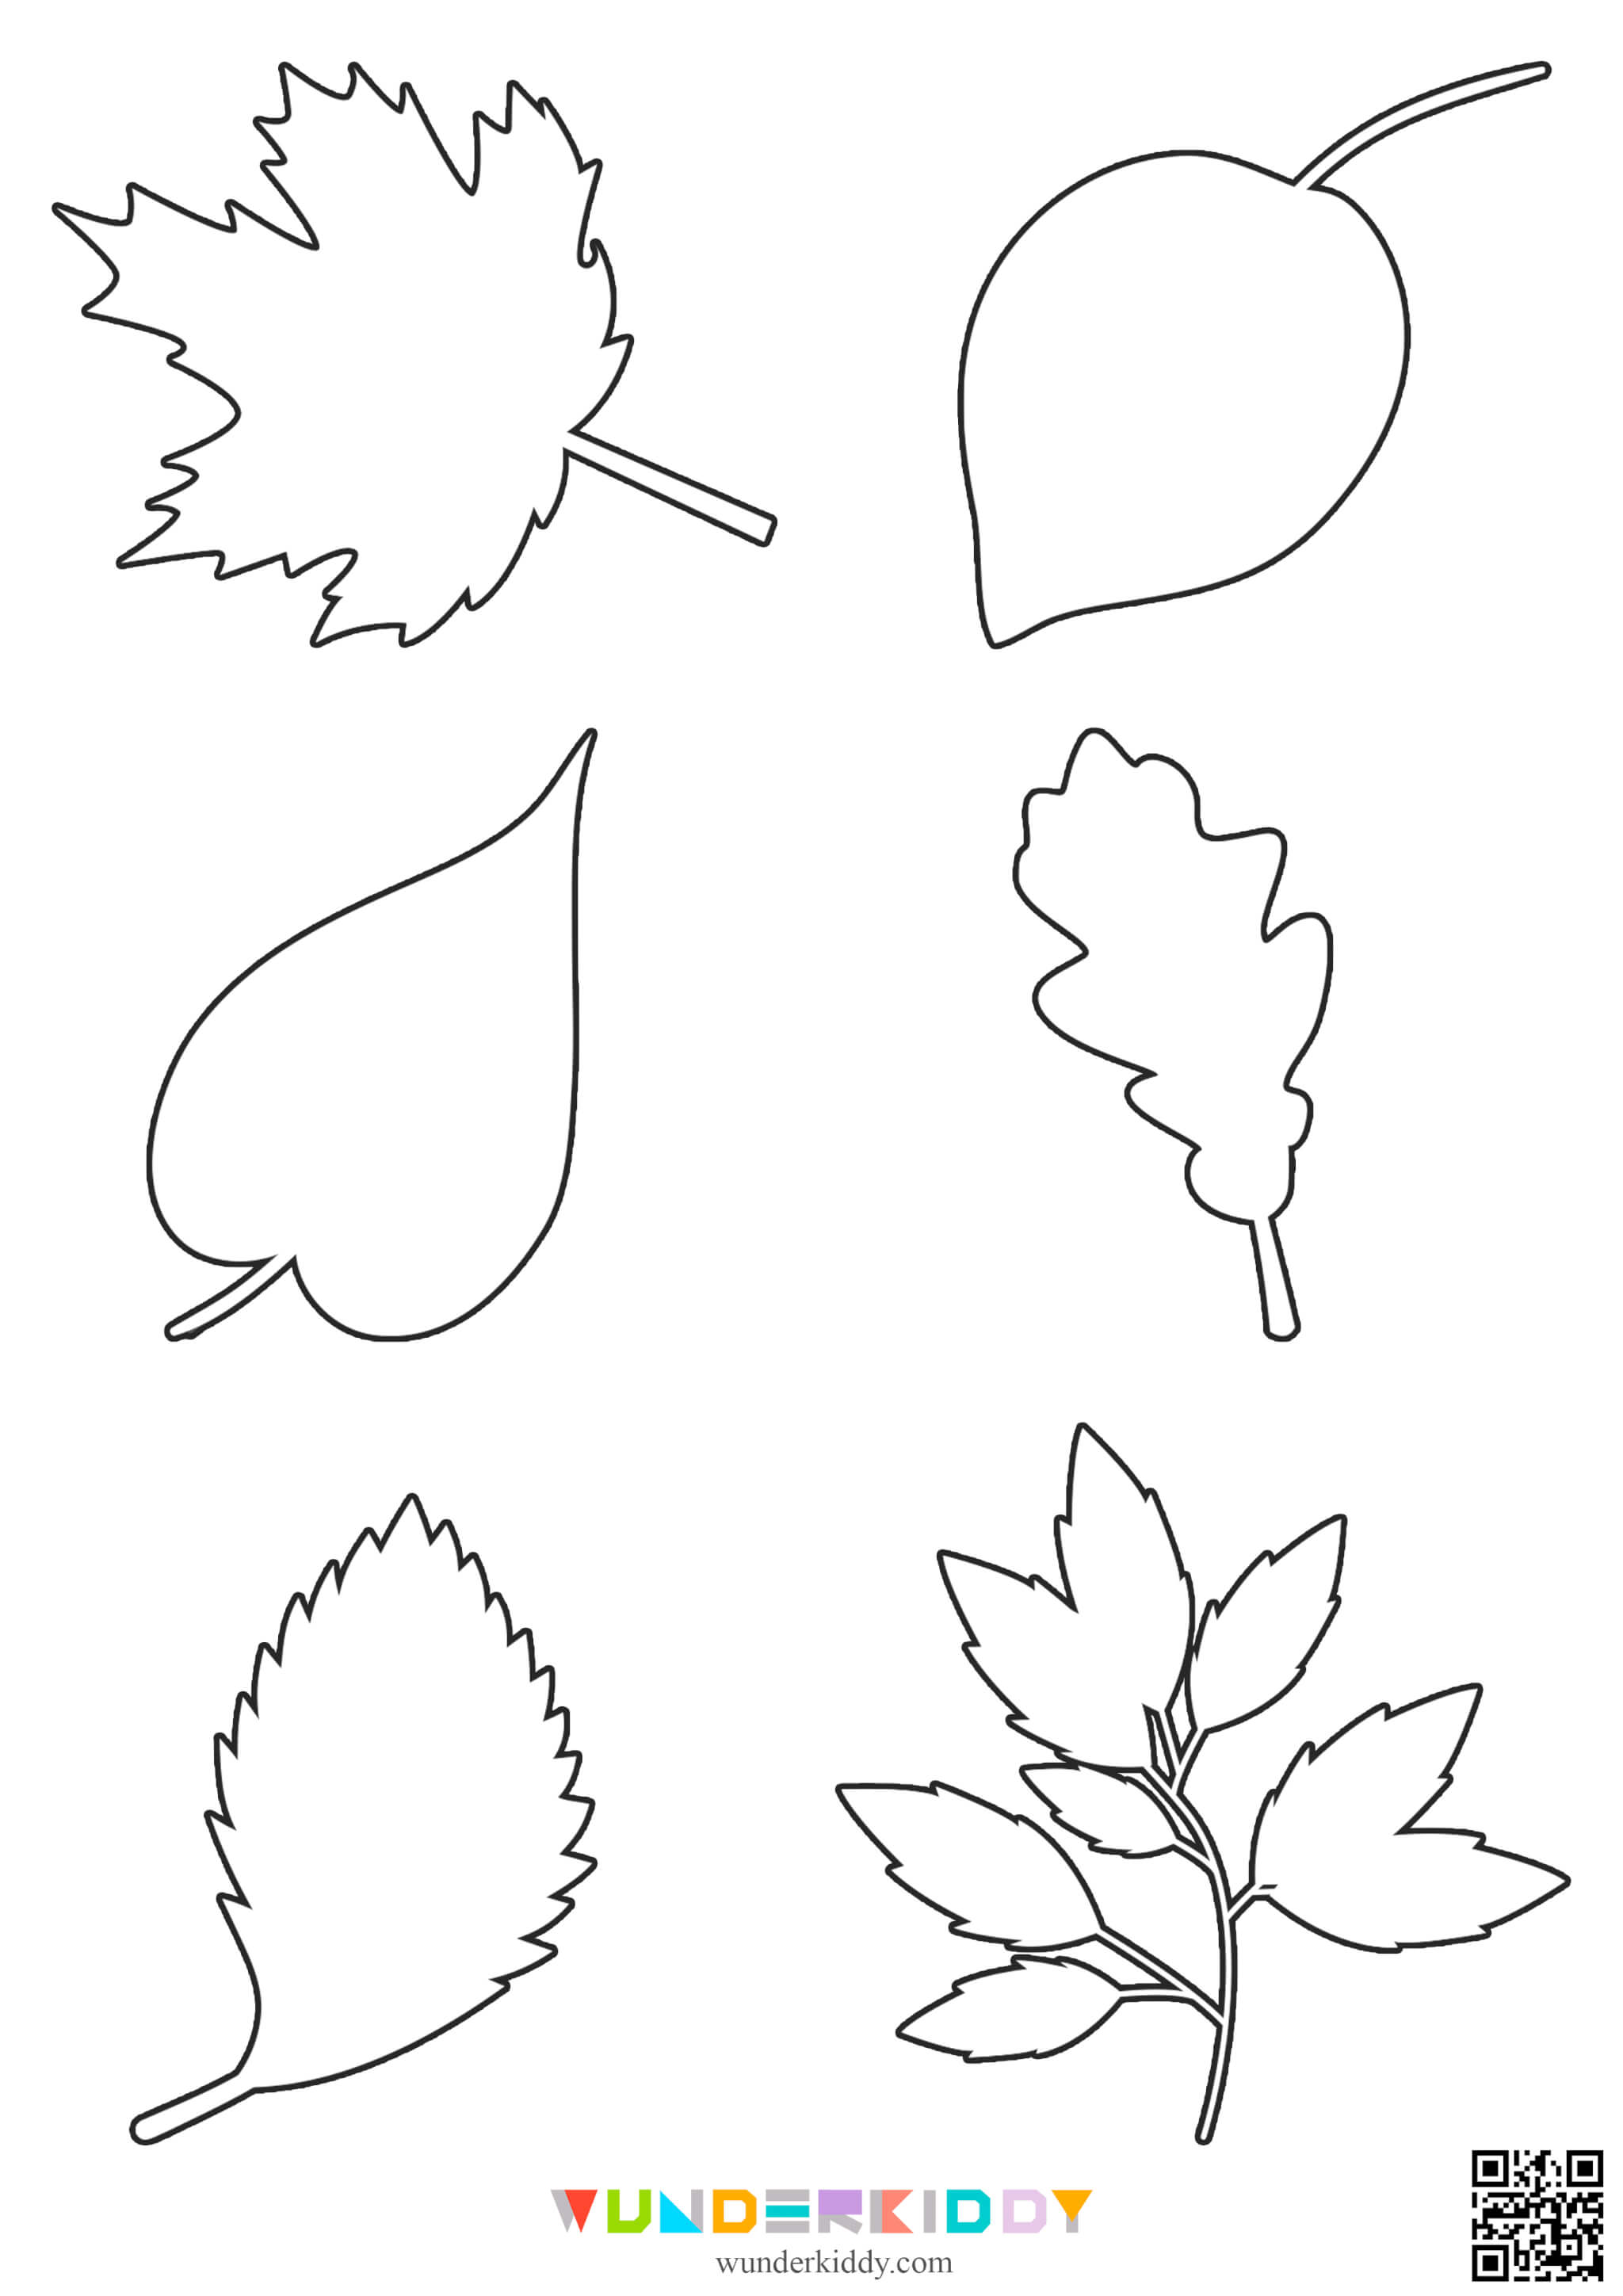 Autumn Leaves Free Outline Templates - Image 9